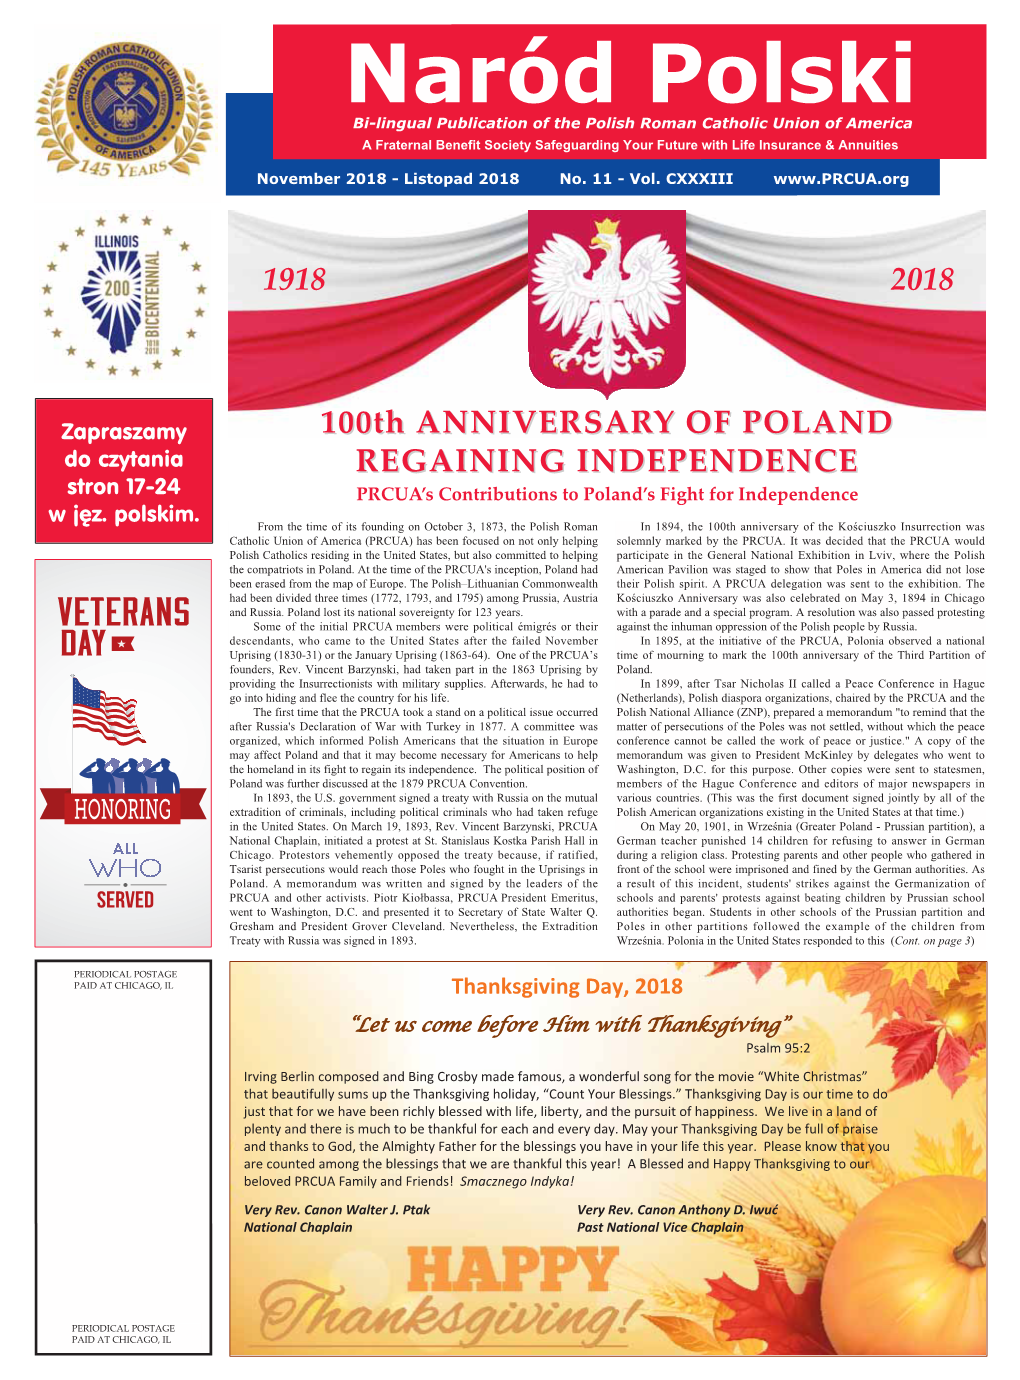 Naród Polski Bi-Lingual Publication of the Polish Roman Catholic Union of America a Fraternal Benefit Society Safeguarding Your Future with Life Insurance & Annuities